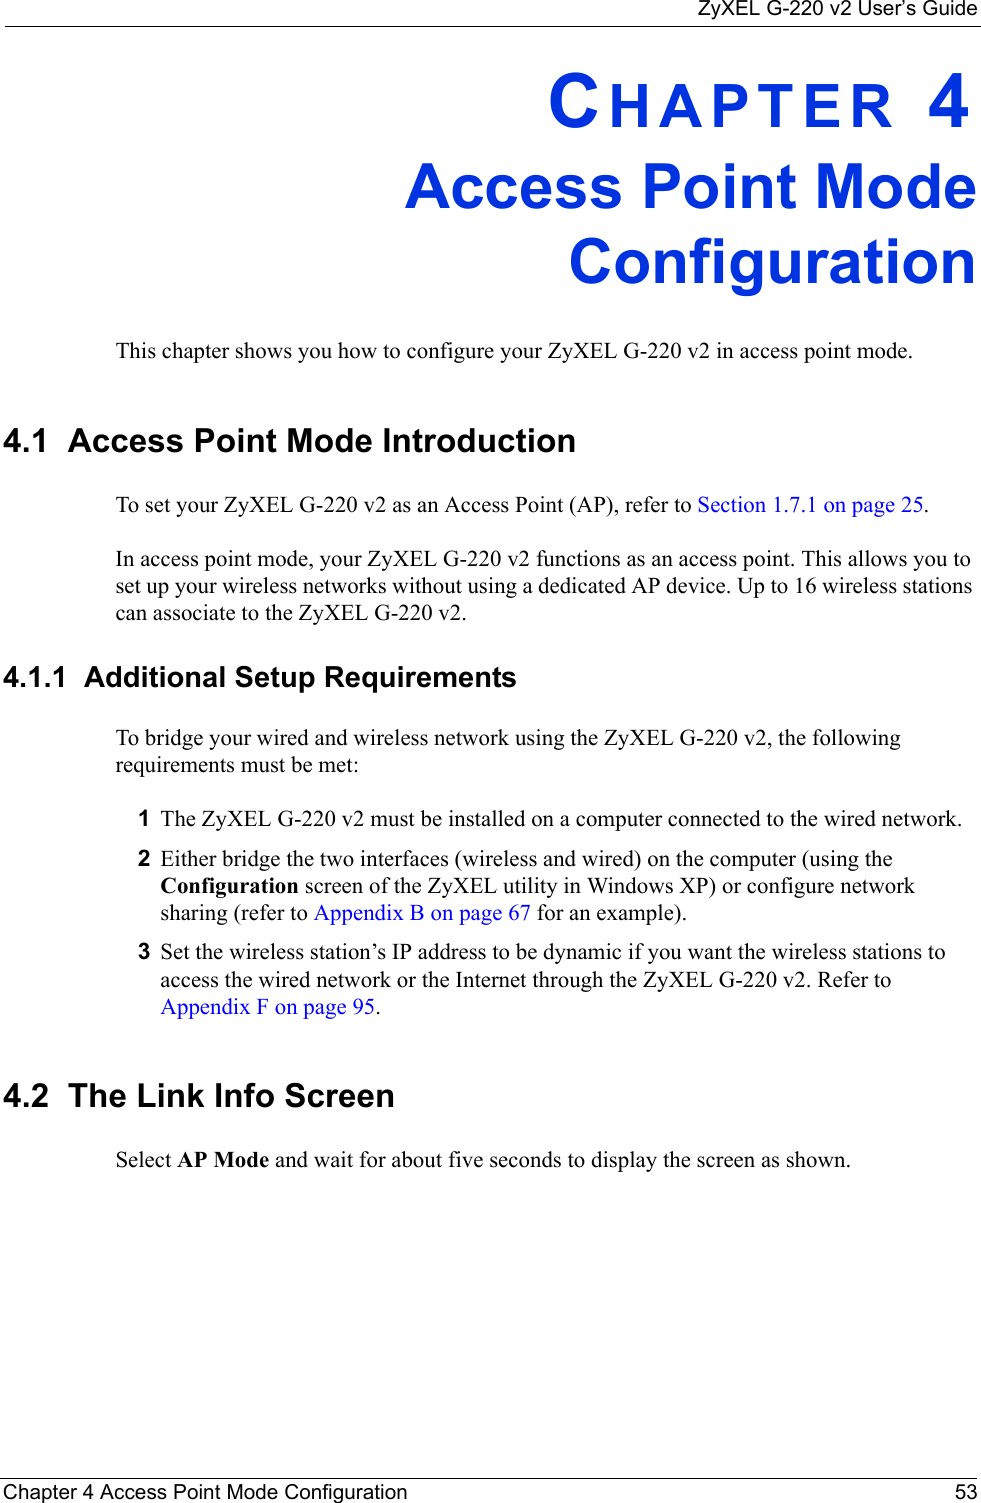 ZyXEL G-220 v2 User’s GuideChapter 4 Access Point Mode Configuration 53CHAPTER 4Access Point ModeConfigurationThis chapter shows you how to configure your ZyXEL G-220 v2 in access point mode.4.1  Access Point Mode Introduction To set your ZyXEL G-220 v2 as an Access Point (AP), refer to Section 1.7.1 on page 25.In access point mode, your ZyXEL G-220 v2 functions as an access point. This allows you to set up your wireless networks without using a dedicated AP device. Up to 16 wireless stations can associate to the ZyXEL G-220 v2.4.1.1  Additional Setup RequirementsTo bridge your wired and wireless network using the ZyXEL G-220 v2, the following requirements must be met:1The ZyXEL G-220 v2 must be installed on a computer connected to the wired network.2Either bridge the two interfaces (wireless and wired) on the computer (using the Configuration screen of the ZyXEL utility in Windows XP) or configure network sharing (refer to Appendix B on page 67 for an example).3Set the wireless station’s IP address to be dynamic if you want the wireless stations to access the wired network or the Internet through the ZyXEL G-220 v2. Refer to Appendix F on page 95.4.2  The Link Info Screen Select AP Mode and wait for about five seconds to display the screen as shown.